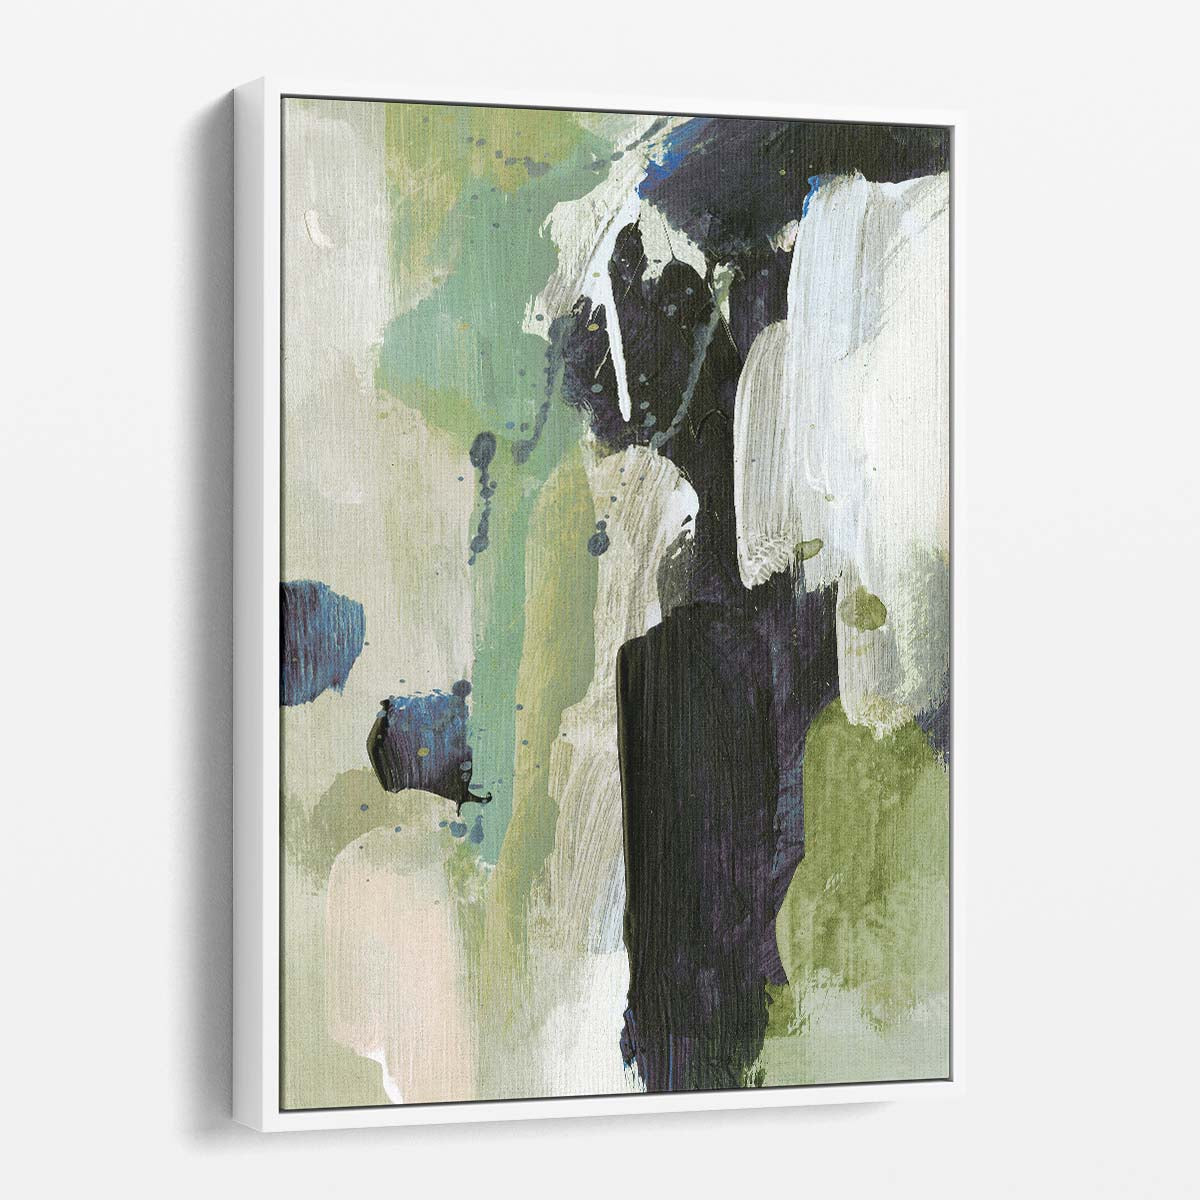 Dan Hobday's Modern Minimalistic Green Waterfall Abstract Illustration by Luxuriance Designs, made in USA